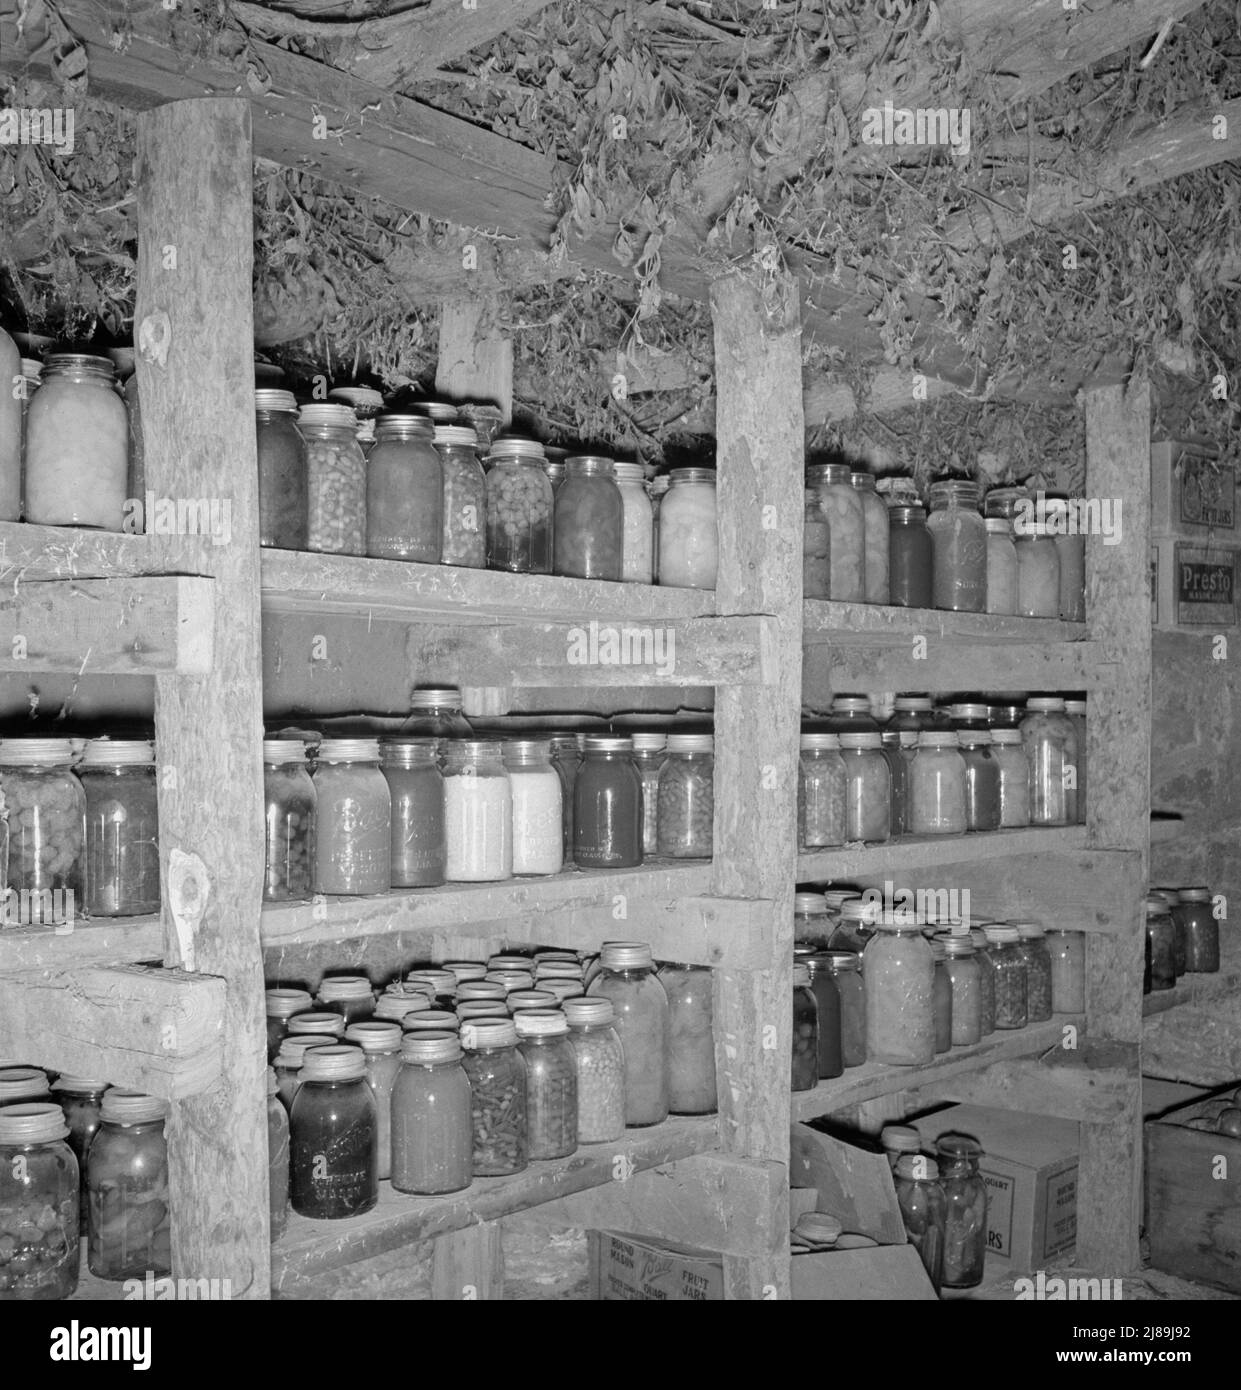 Mrs. Wardlow has 500 quarts of food in her dugout cellar. Dead Ox Flat, Malheur County, Oregon. Stock Photo